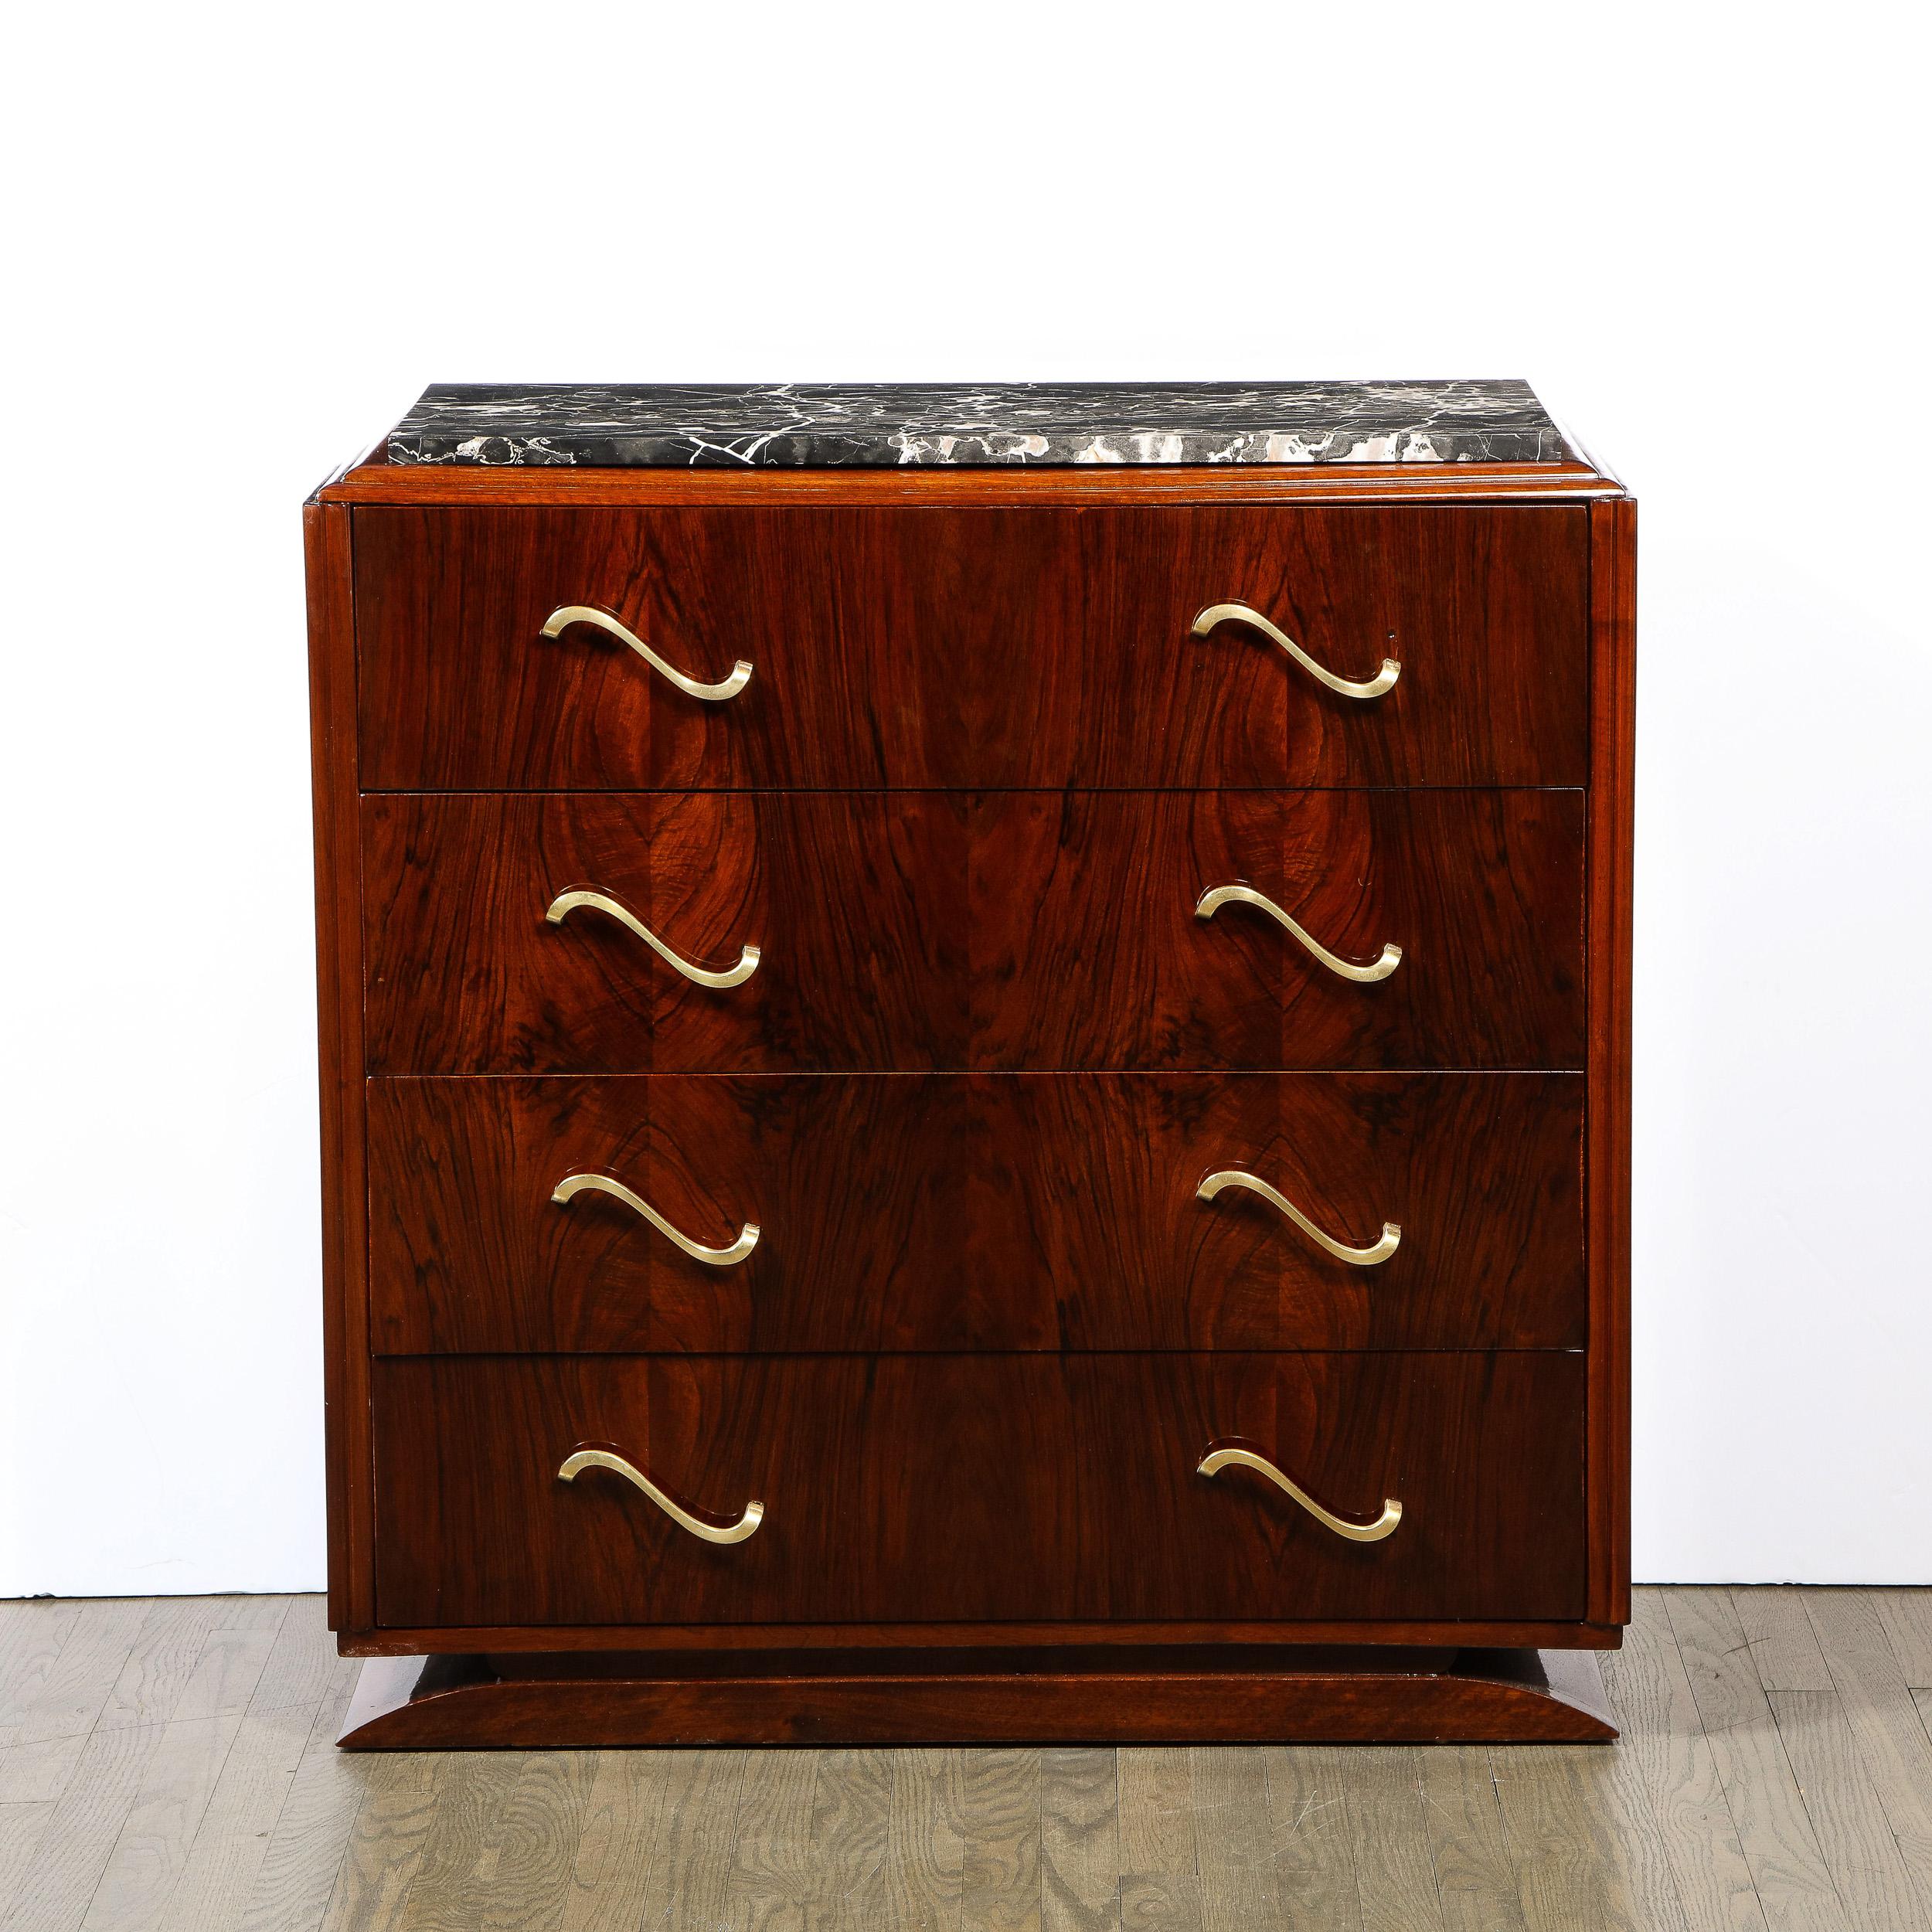 This elegant Art Deco sideboard was realized in France, circa 1940. It features a beveled base and a volumetric rectangular body with a tiered skyscraper style top- all in beautiful bookmatched walnut- with an exotic black marble top. The piece